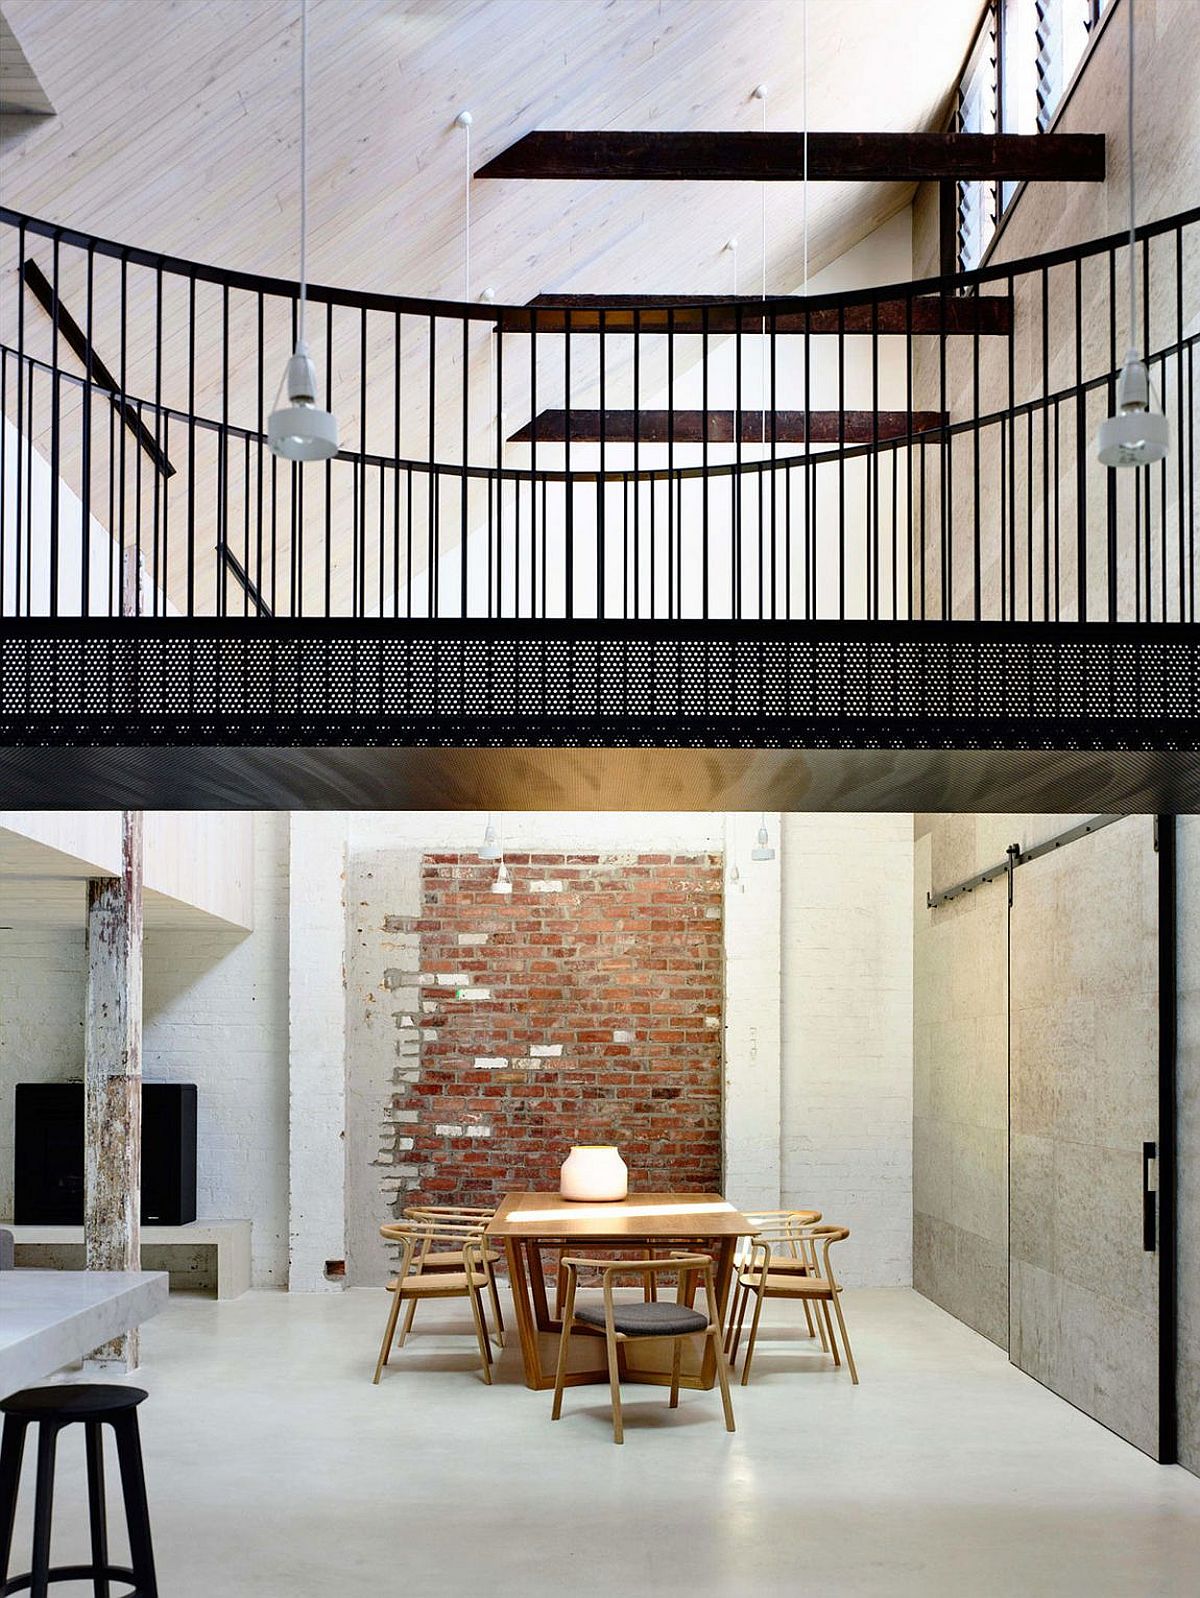 Dining room with exposed brick wall backdrop and a metallic bridge above